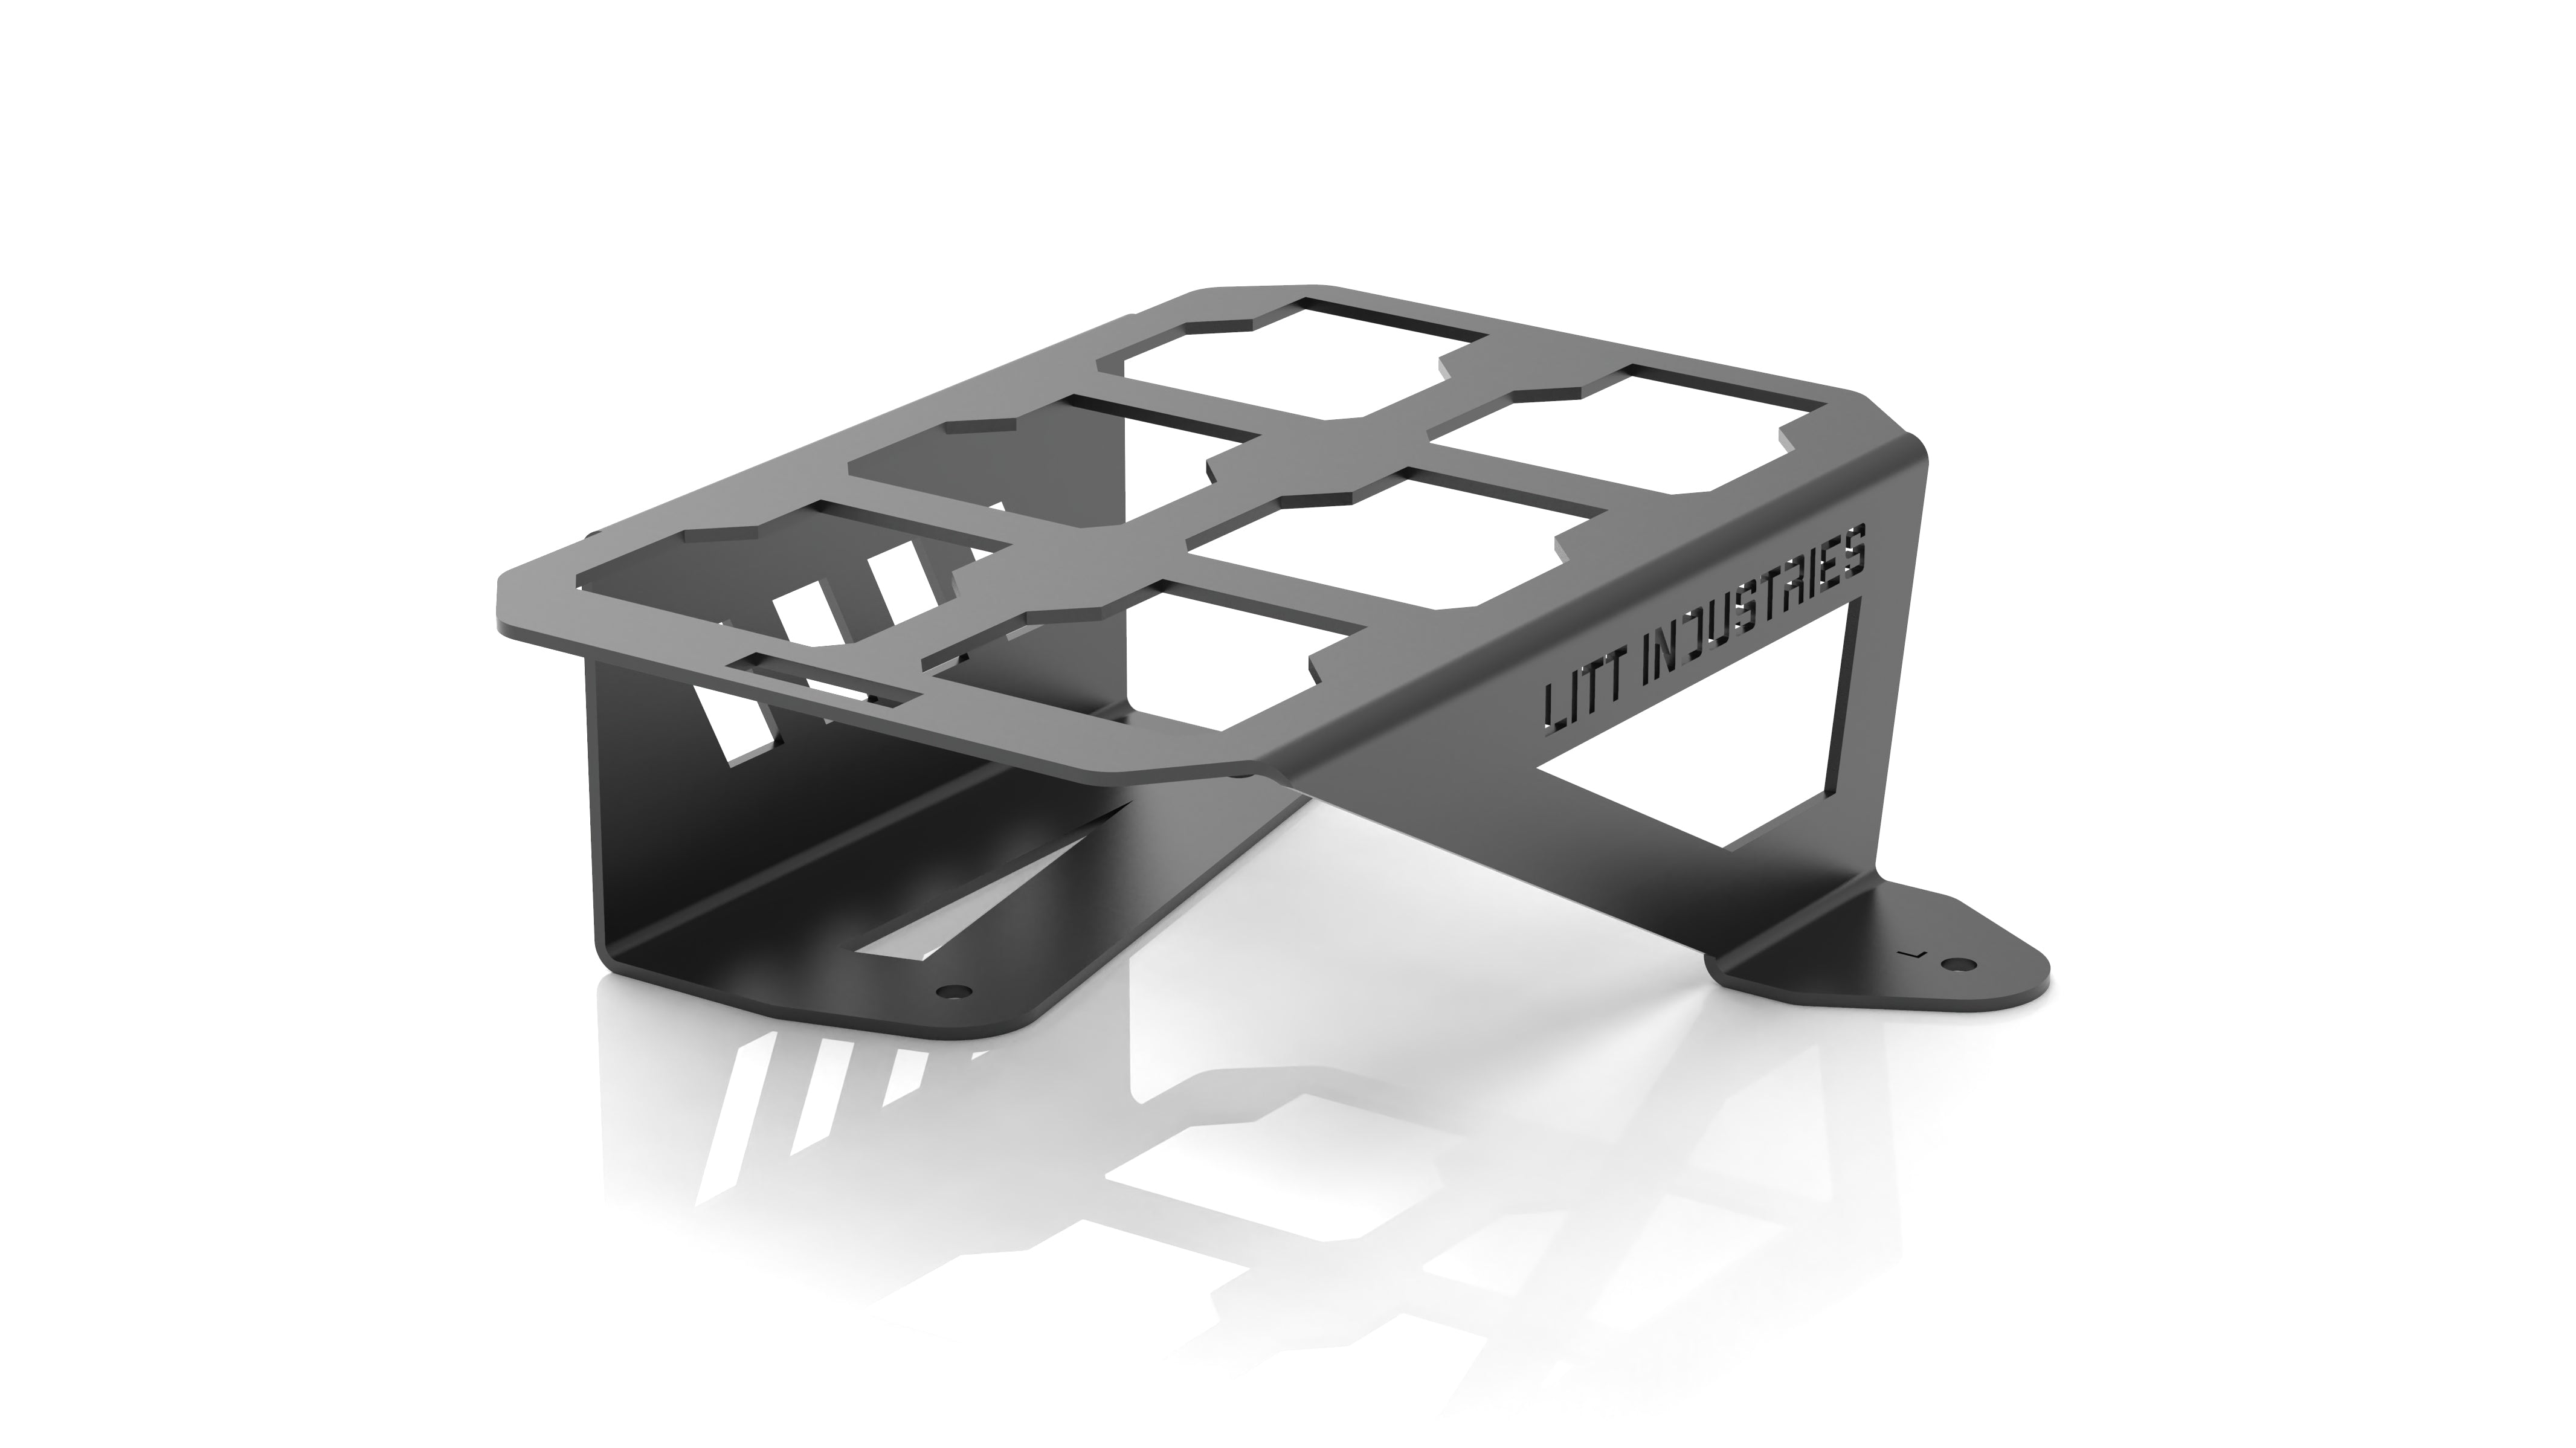 Litt Industries single Milwaukee packout mounts for the can am maverick x3 passengers side or drivers side options best toolbox mounts safe and secure